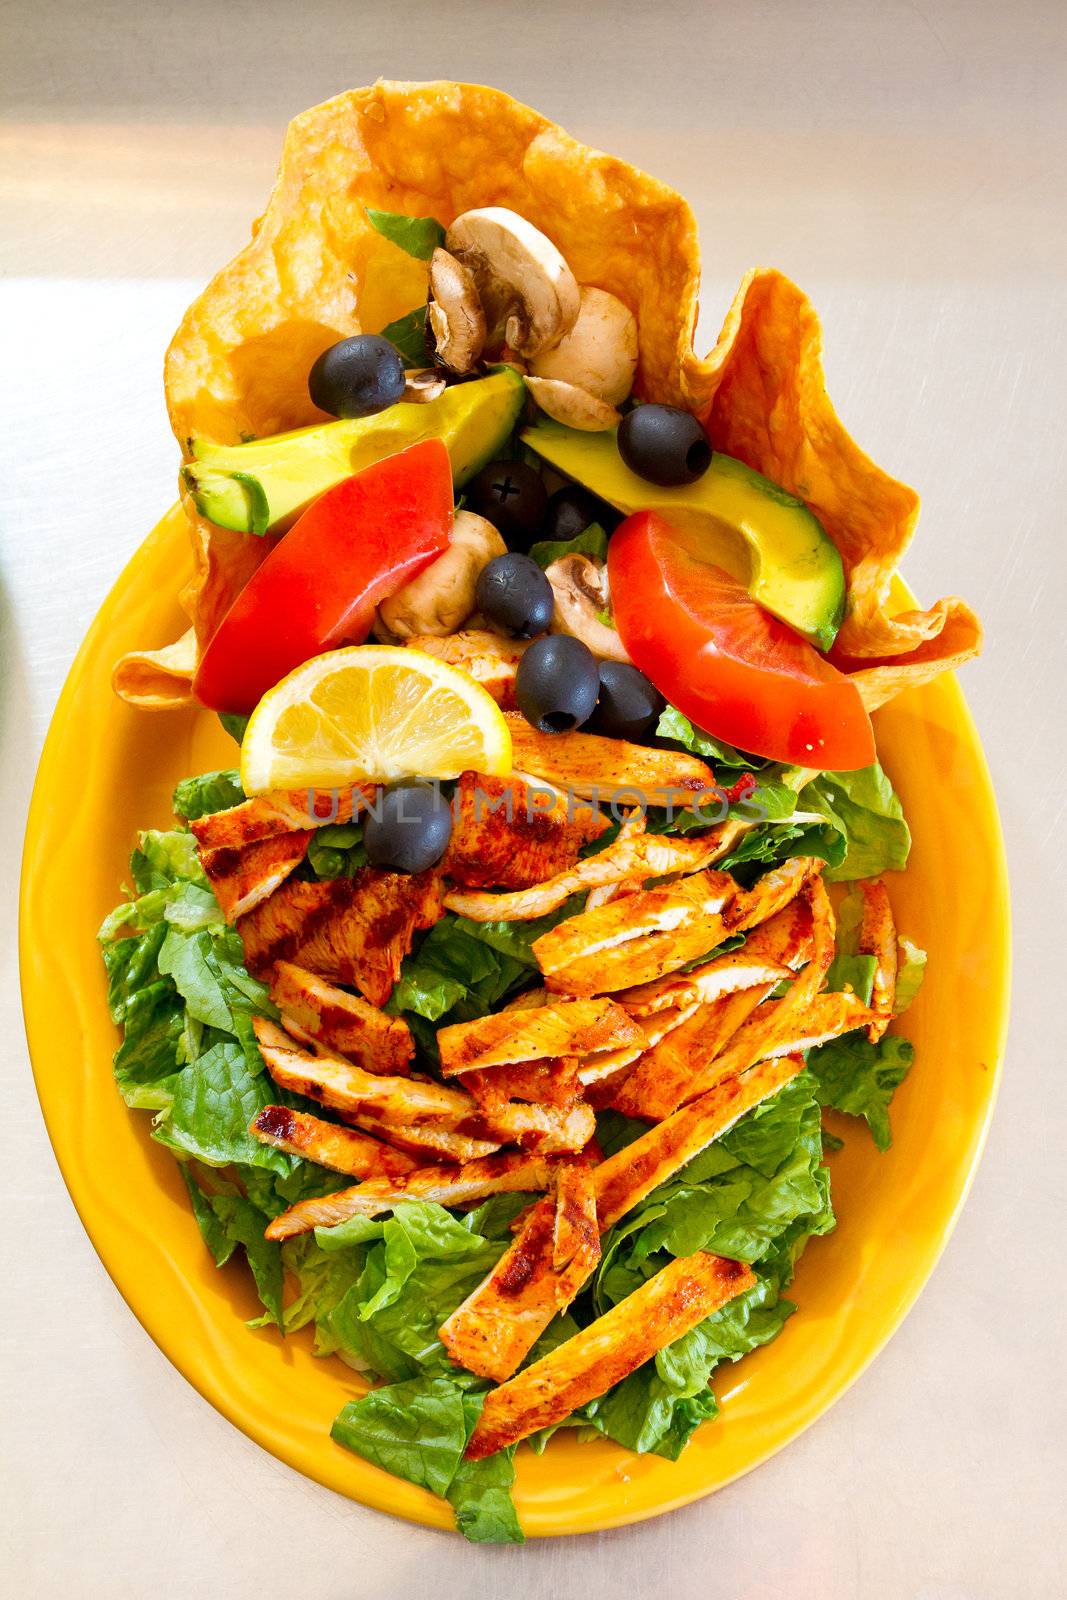 A salad at a Mexican restaurant ready to be served.